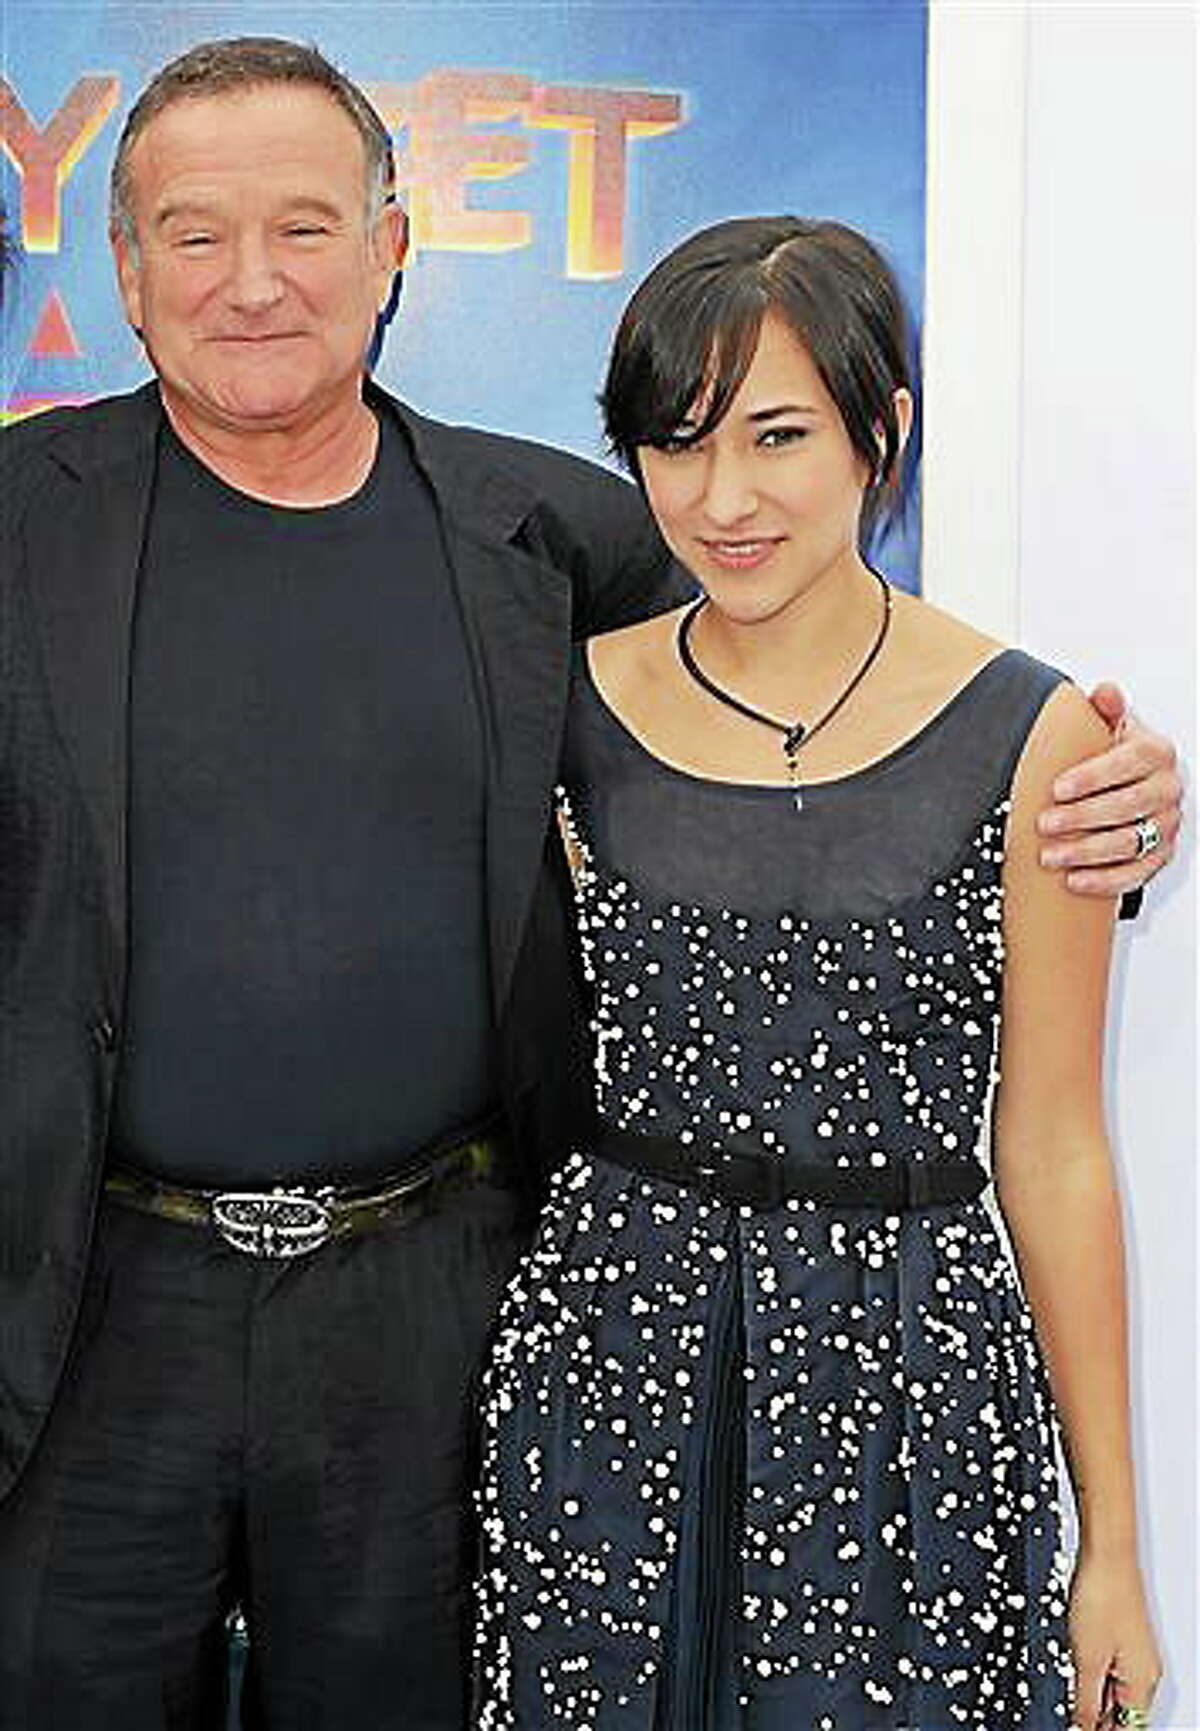 This Nov. 13, 2011, file photo shows actor Robin Williams, left, and his daughter, Zelda, at the premiere of “Happy Feet Two” in Los Angeles. AP Photo/Katy Winn, File